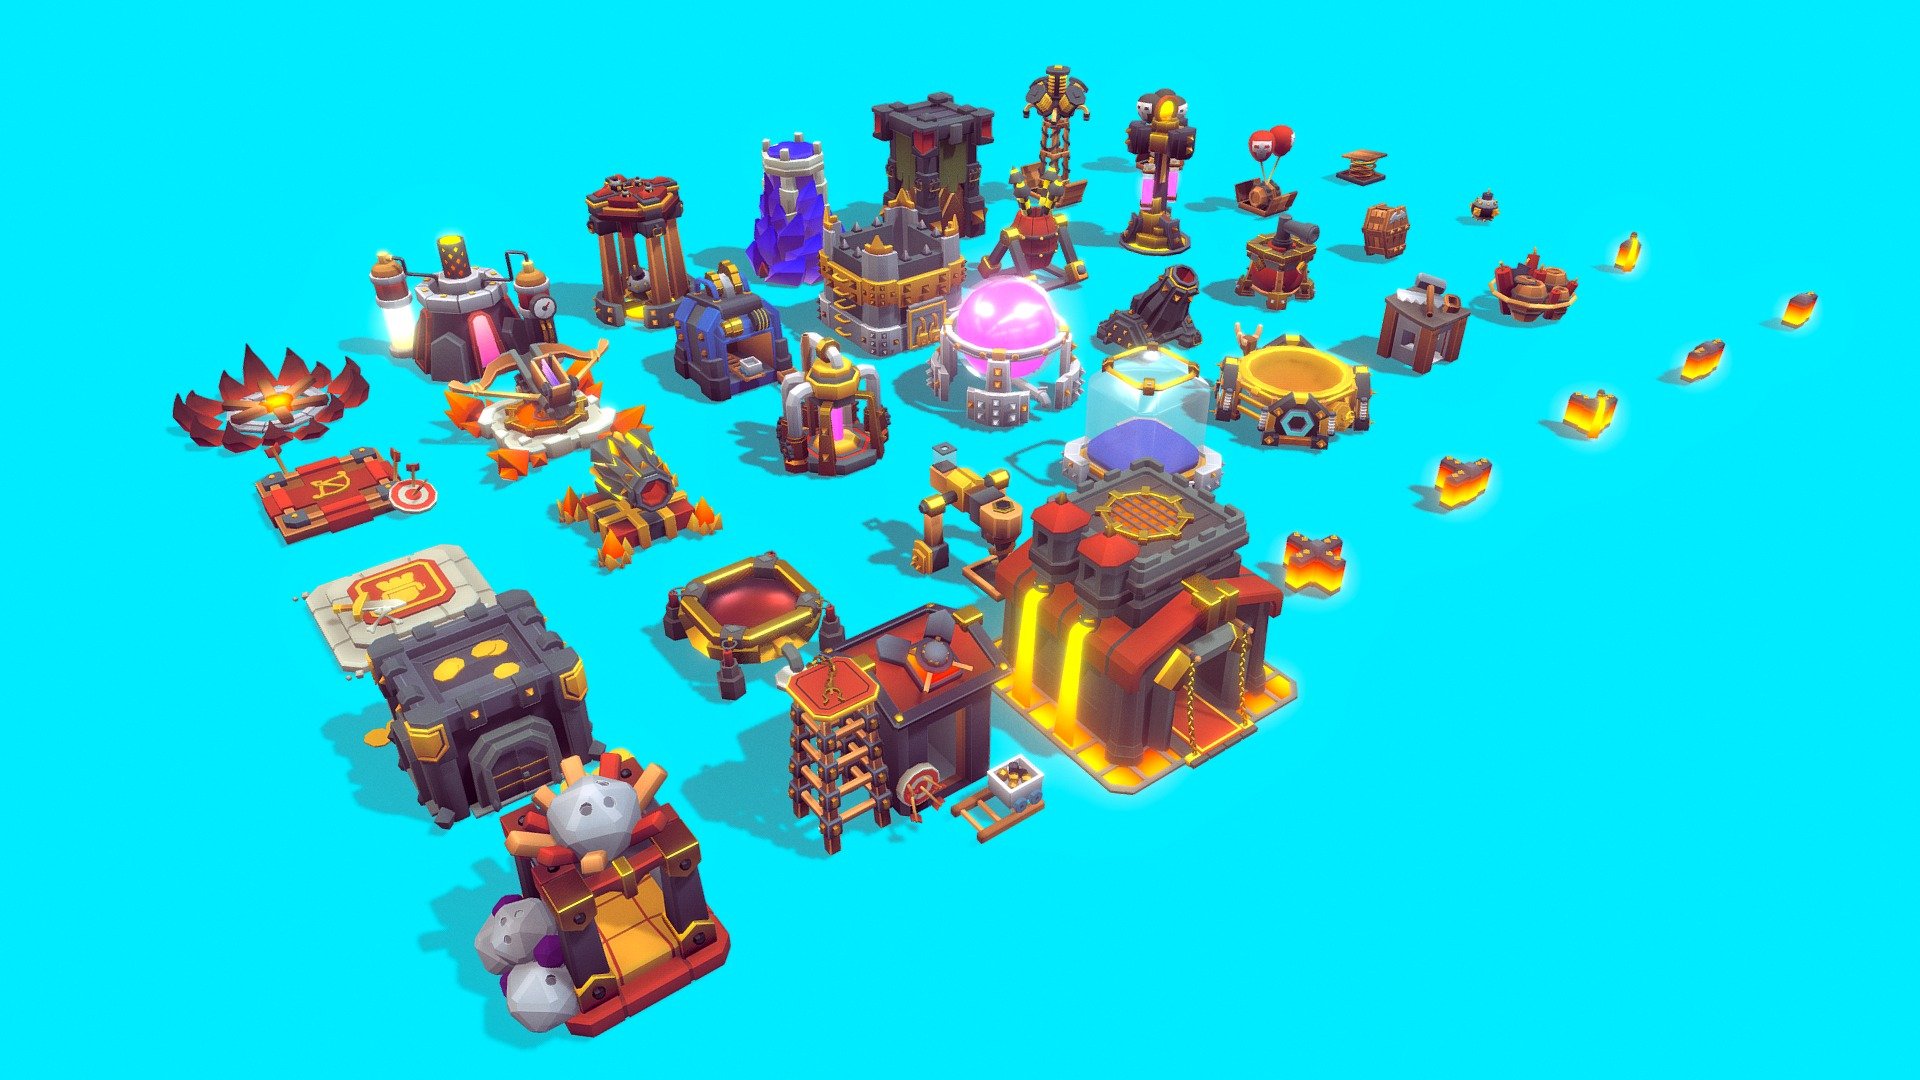 Clash of Clans town hall level 10 fan art
Modeled and textured in Blender. Feel free to use it in anyway you like. If you love this model you can give it a like or comment. let’s be friends ^_^, you can also visit my profile for free stuff or if you want to support me you can buy some of my paid asset. I hope you have a great day.

Follow me for more free stuf in the future. ^_^ - Clash of Clans - Buy Royalty Free 3D model by LowPolyBoy 3d model